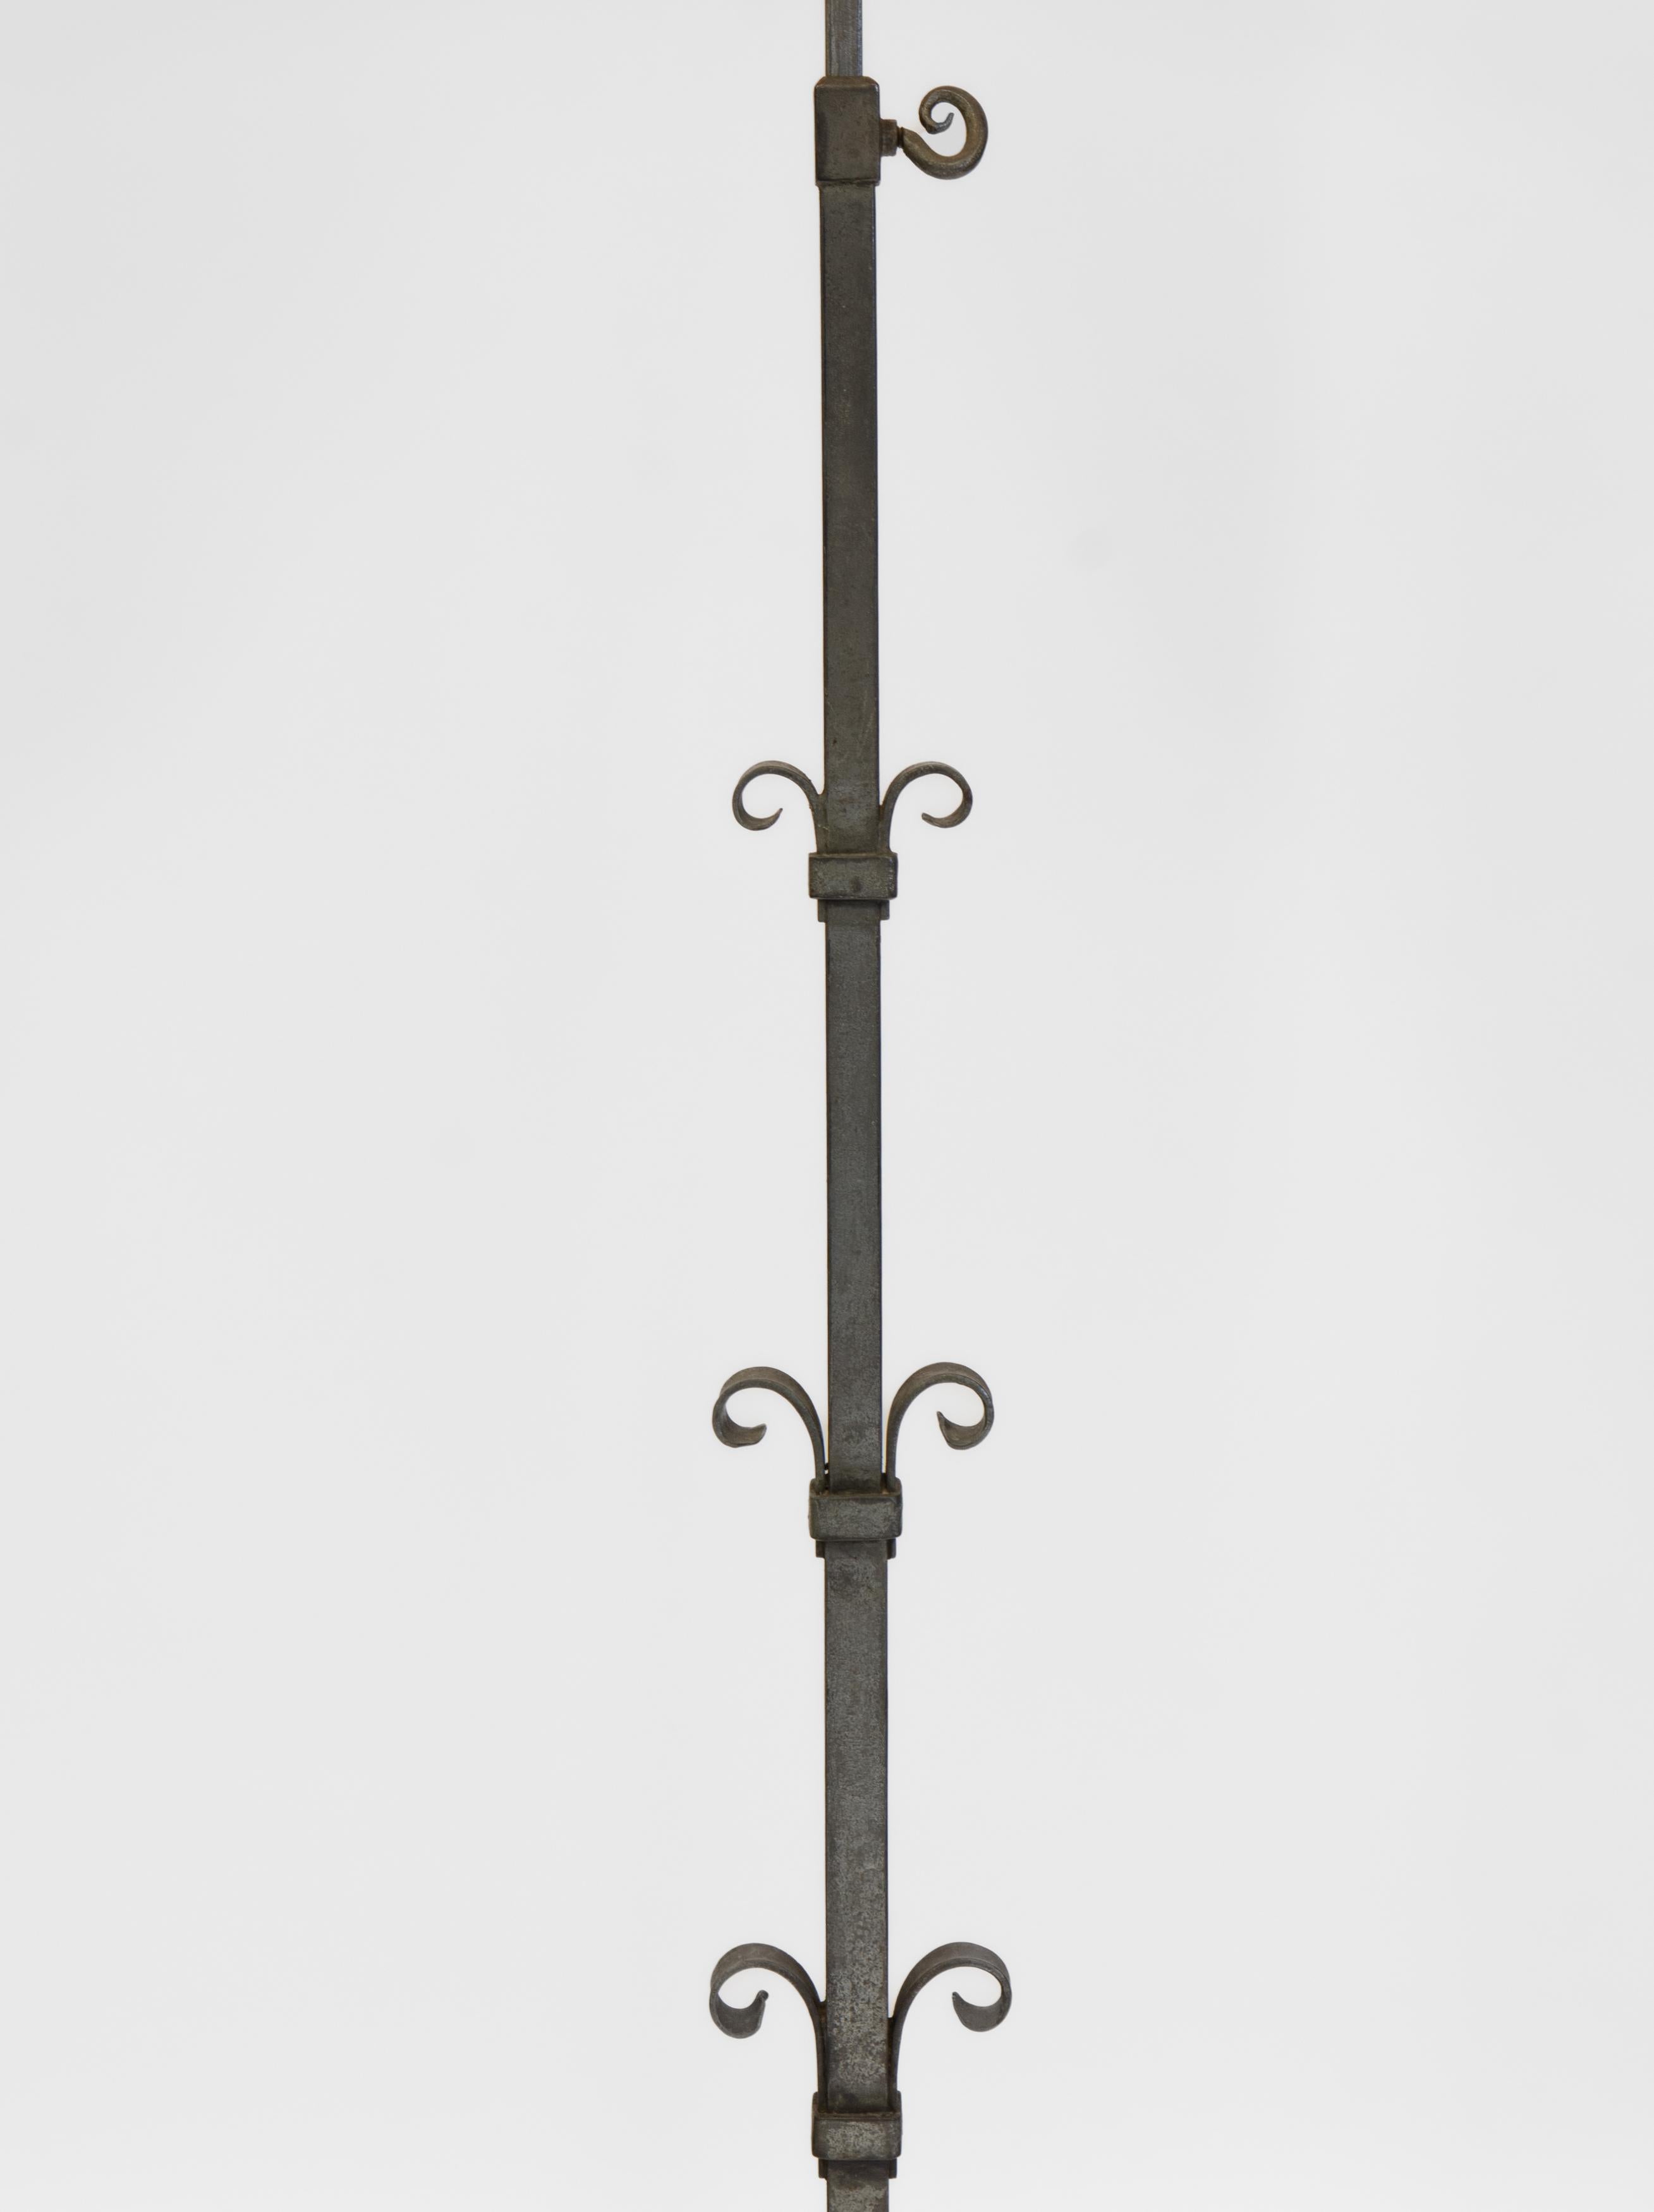 A mid-century Spanish forged iron height-adjustable floor lamp. Circa 1960.

Forged iron design on a square upright, patina to the metal with age. Structurally very sound and the height adjustment works very well. 

The lamp has been re-wired and a